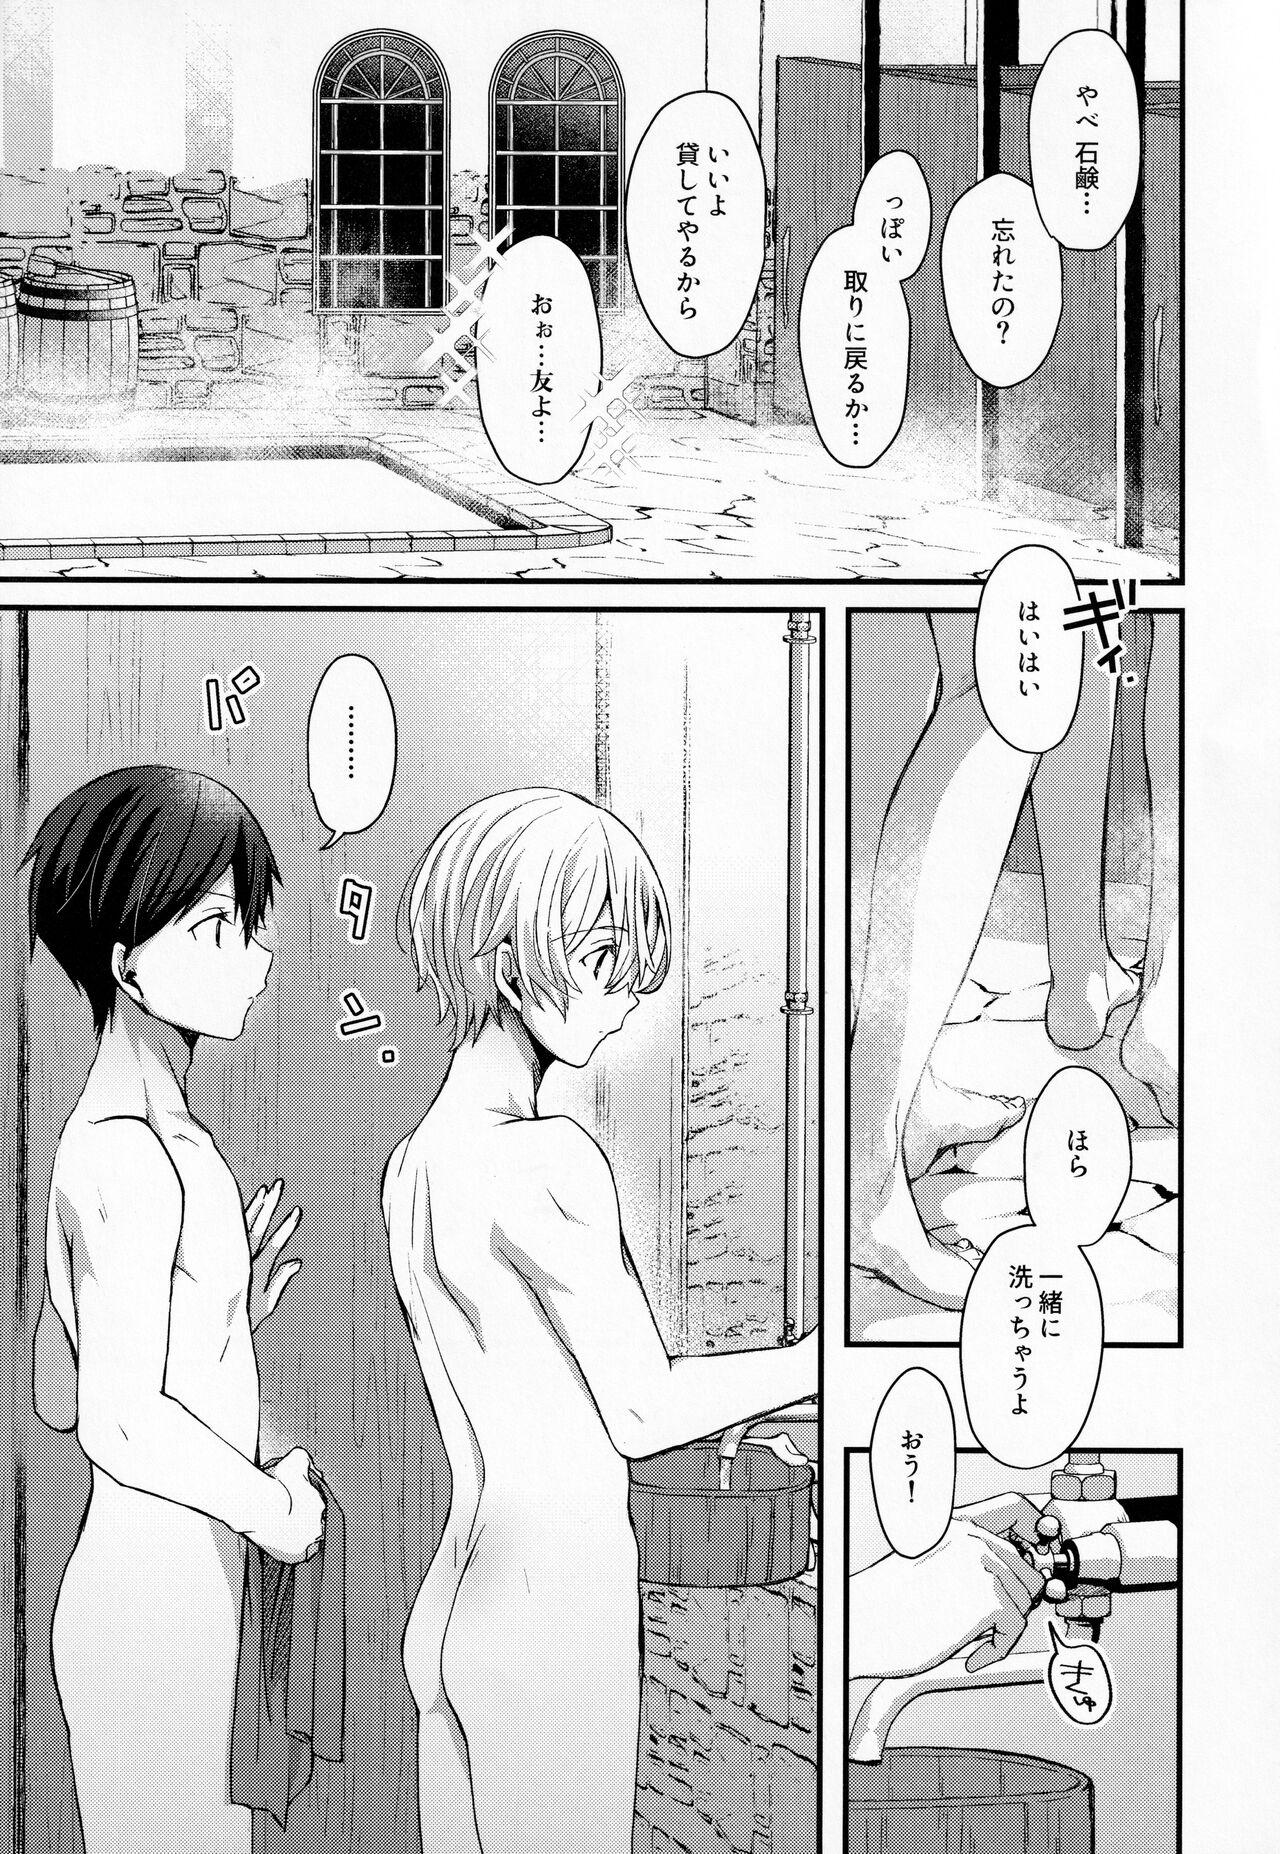 Behind Gaman Shinaide - Sword art online Extreme - Page 4